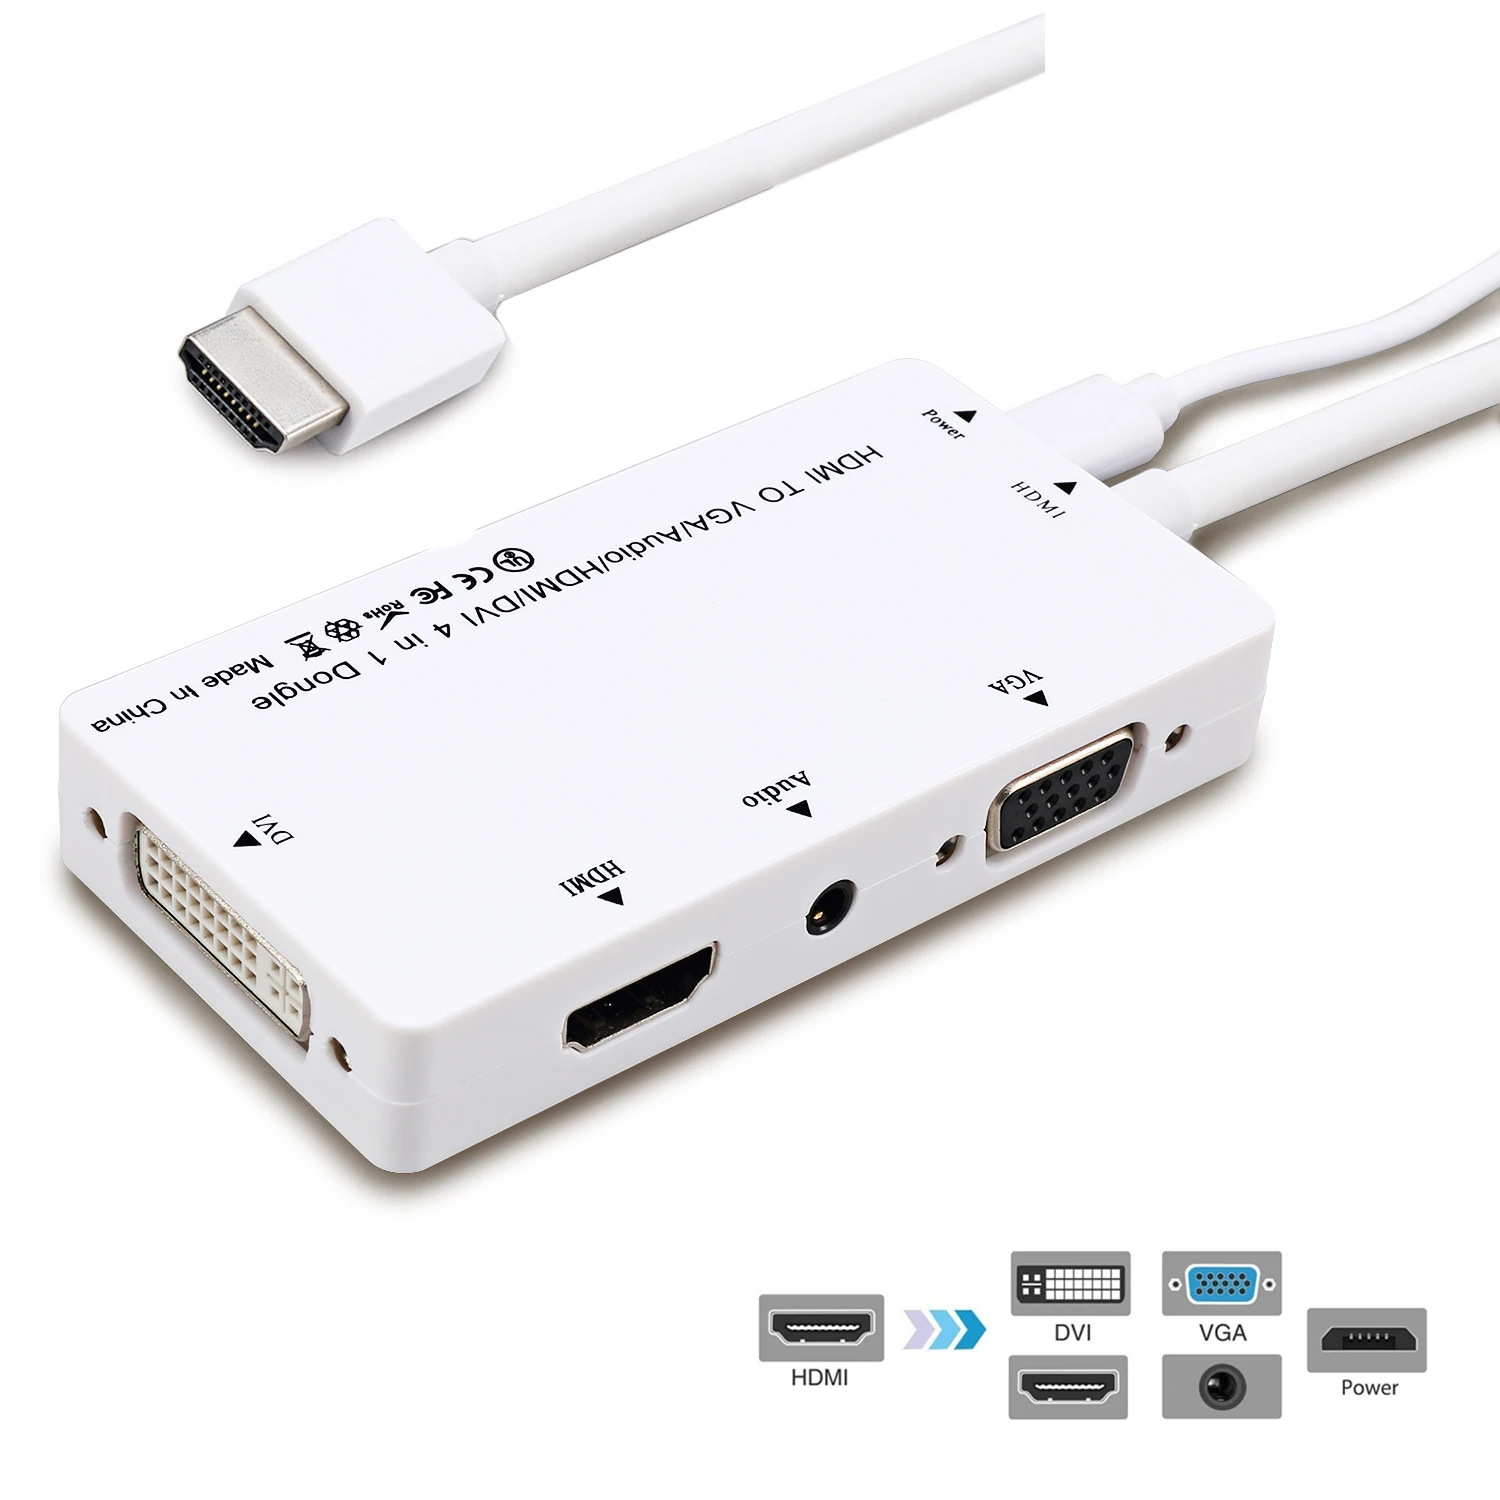 

CYDZ HDMI-compatible to VGA/Audio/HDMI-compatible/DVI 4in1 Dongle Adapter Multiport Splitter Converter For PS3 HDTV PC